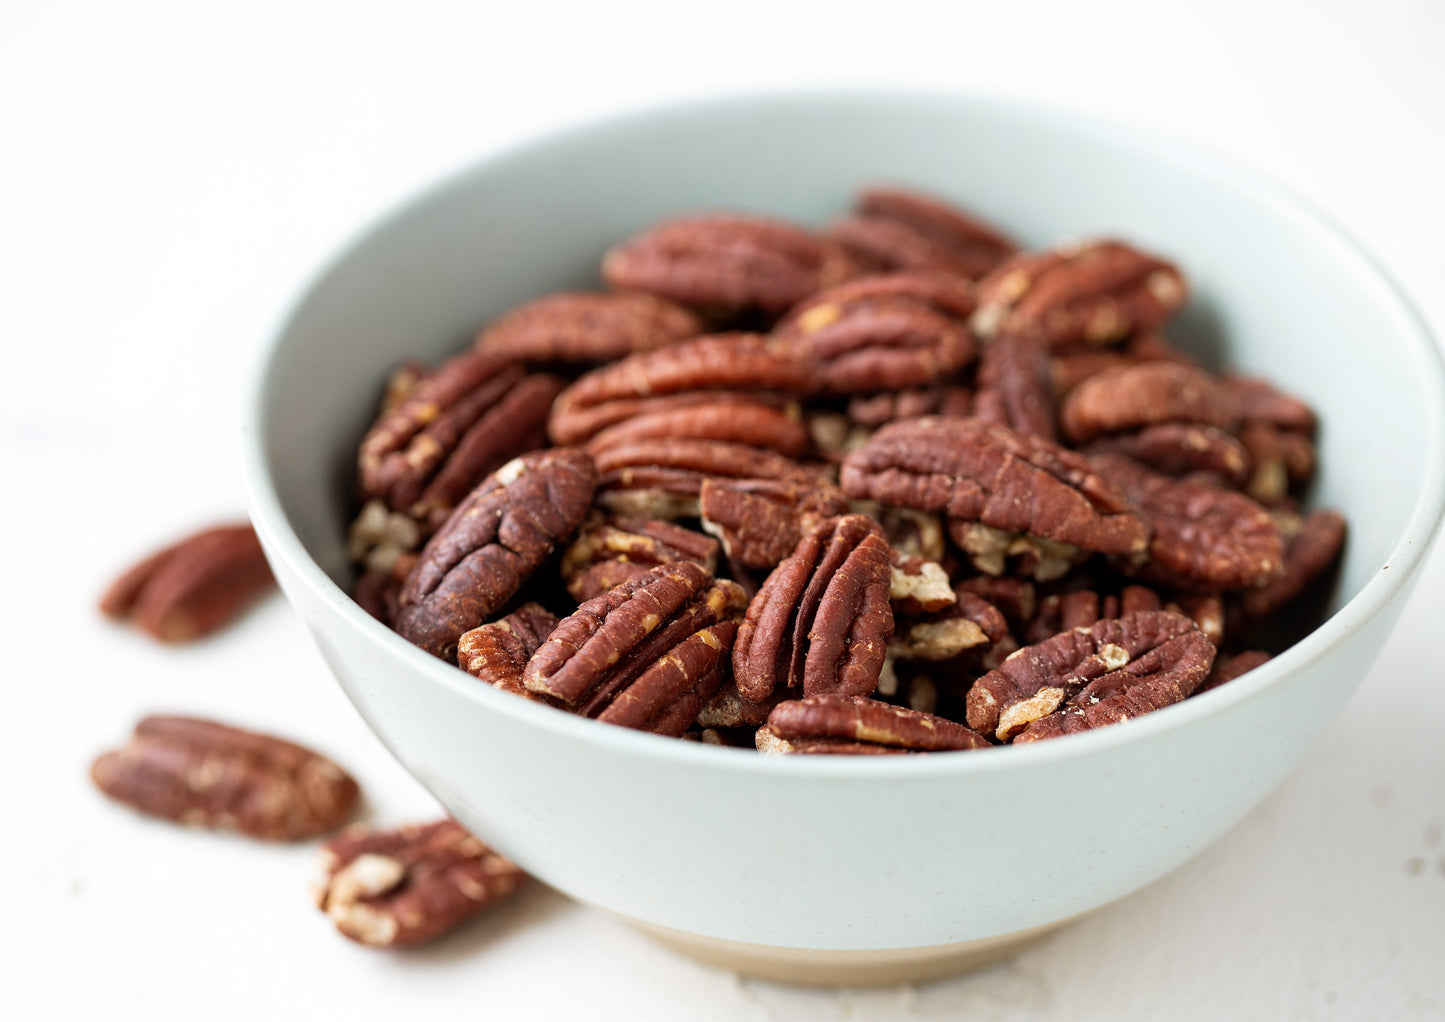 Dry Roasted Pecan Halves with Himalayan Salt – Oven Roasted Lightly Salted Pecan Nuts, No Oil Added, Vegan Snack, Kosher, Keto, Bulk. Good Source of Protein and Fiber